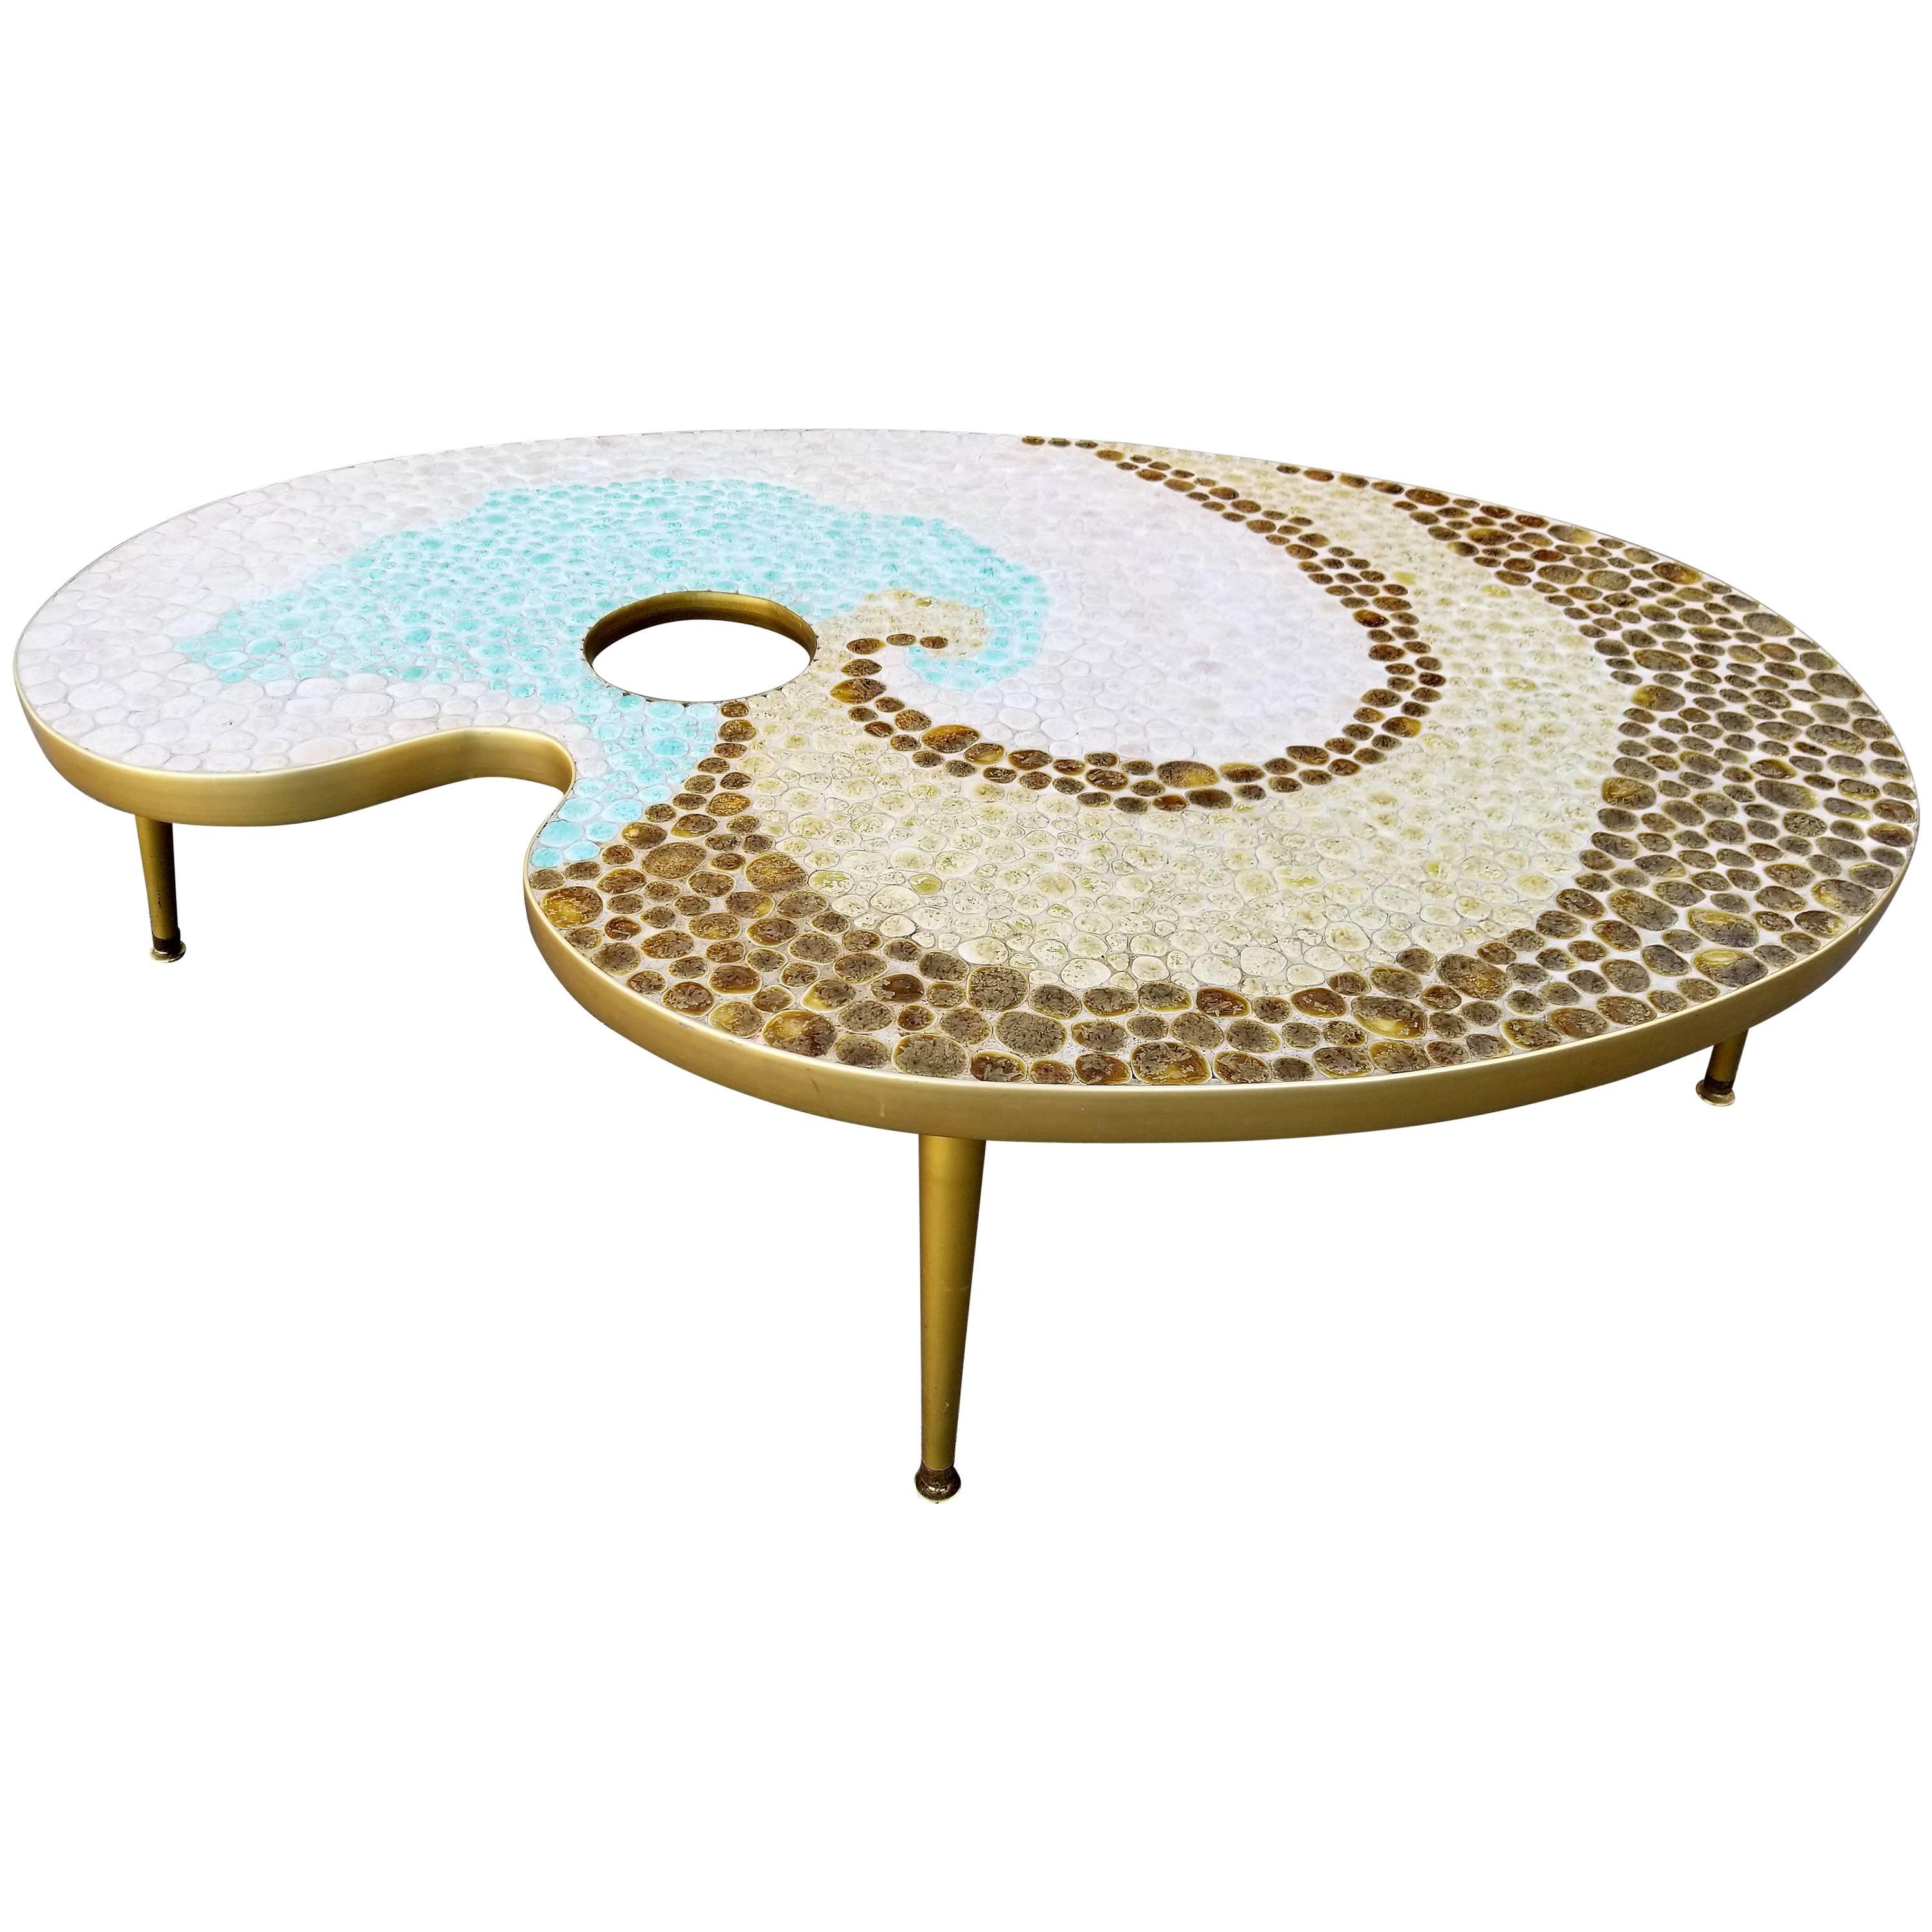 Mosaic Tile Coffee Table Artist Palette For Sale